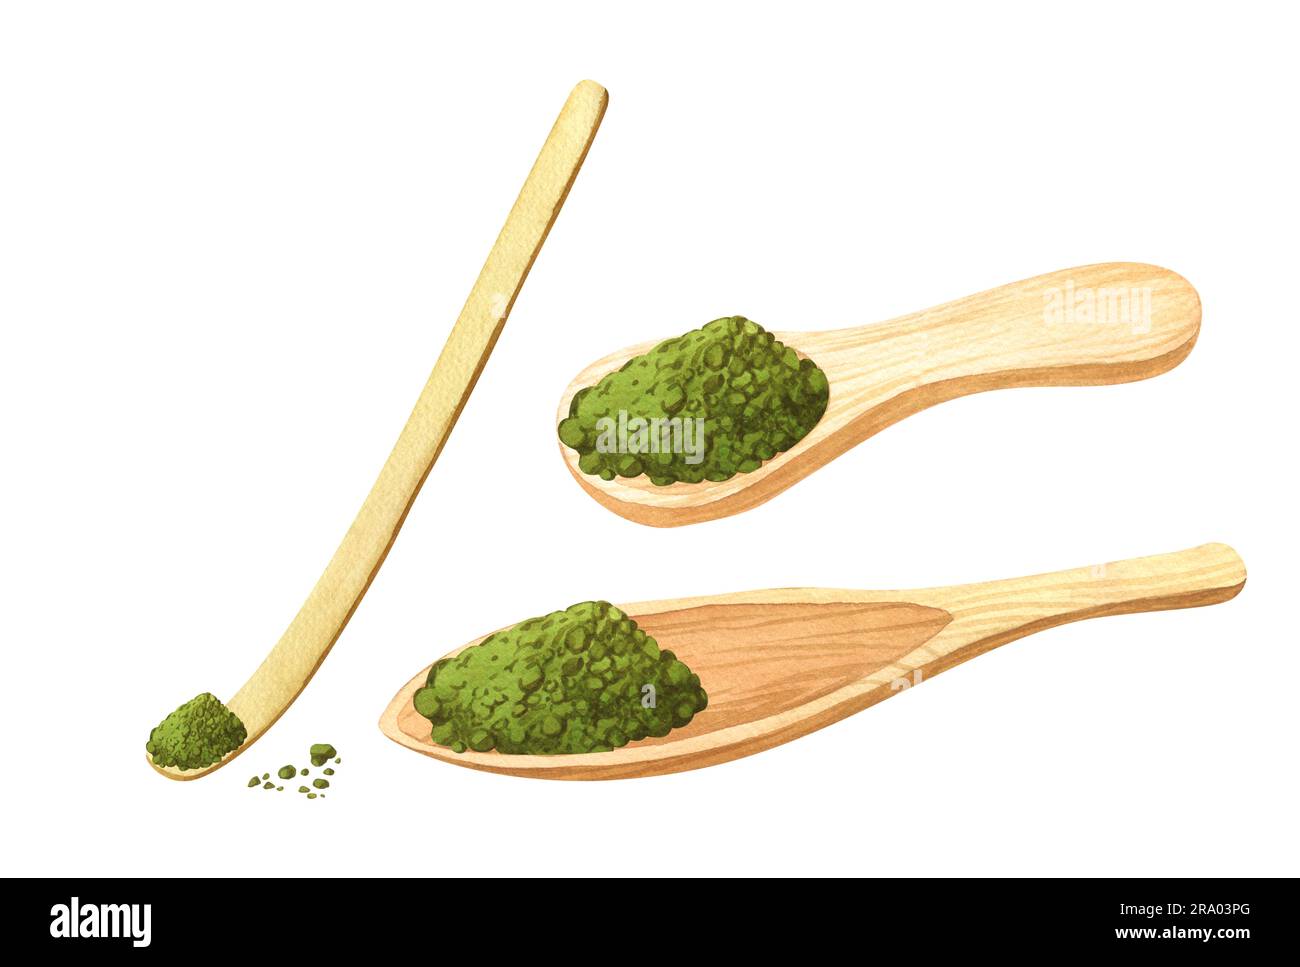 Japanese Bamboo Matcha Spoon For Sale